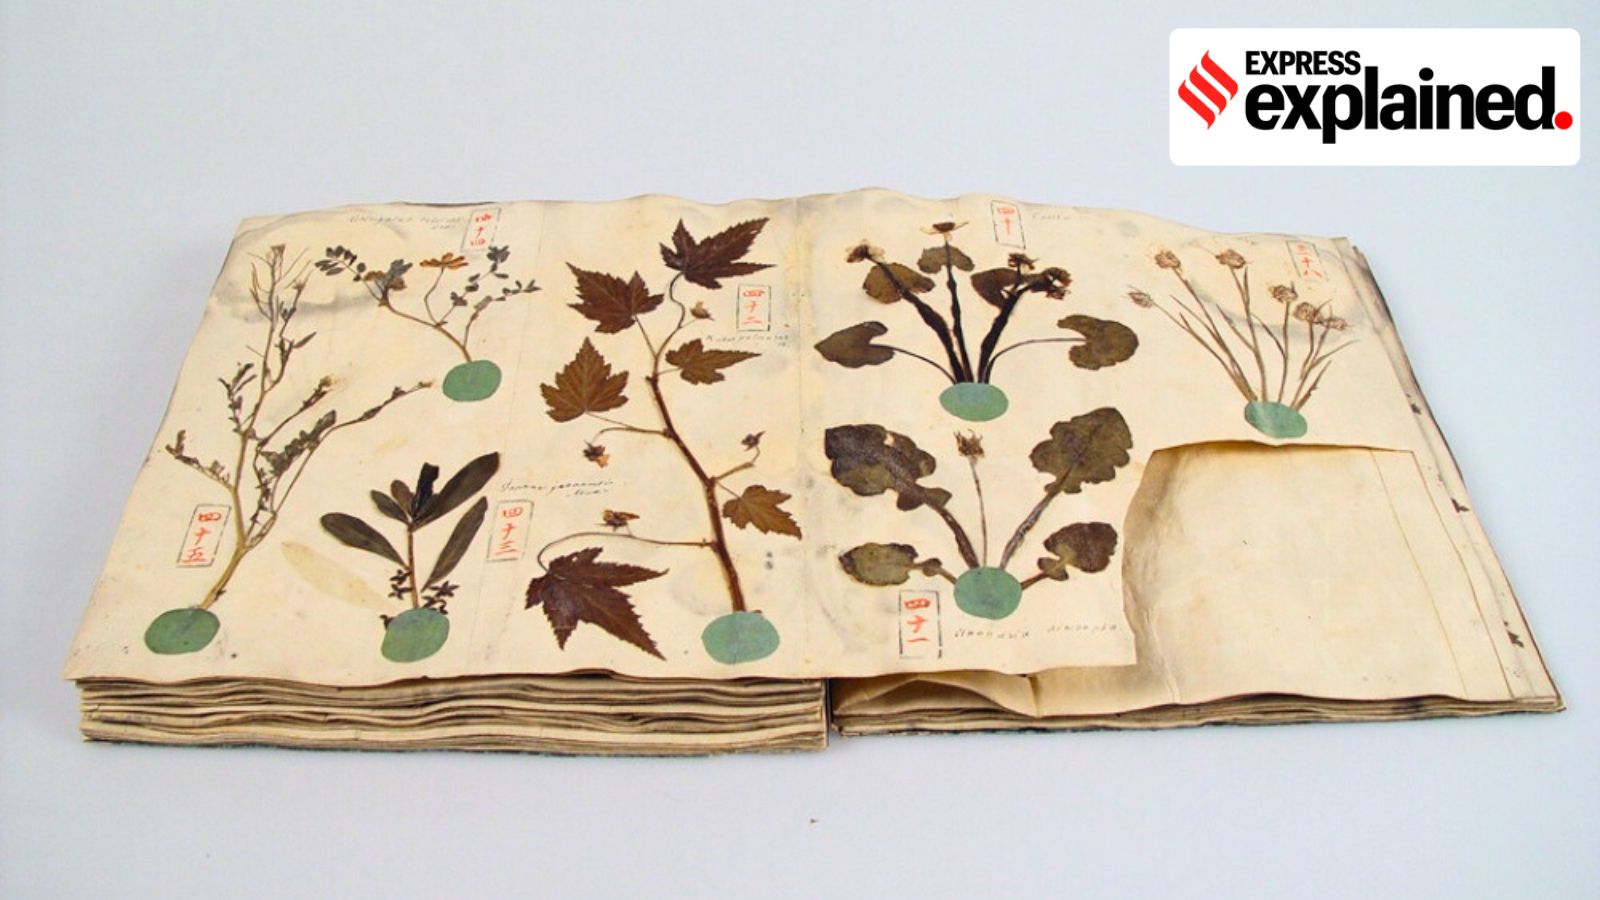 Natures Treasures Preserved: A Collection of Pressed Blooms